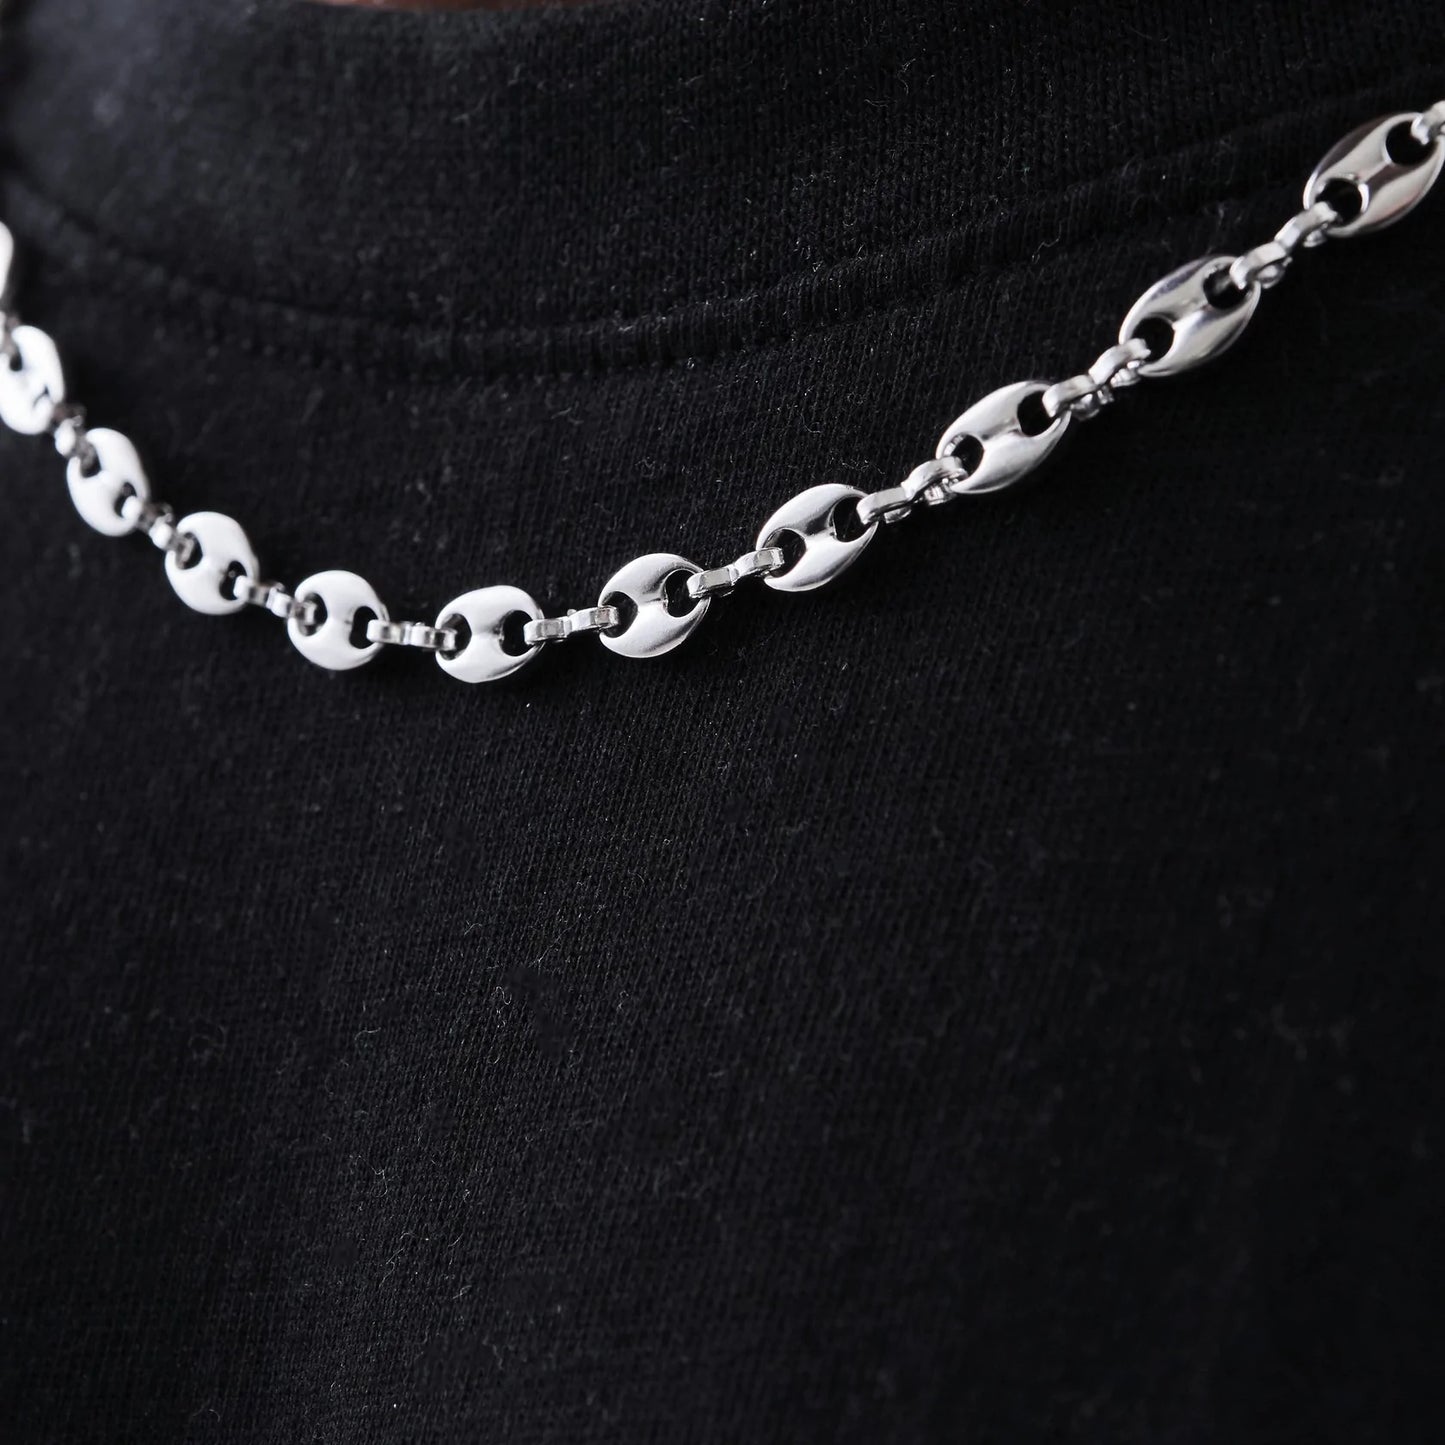 G-Link Chain (Silver) 5mm